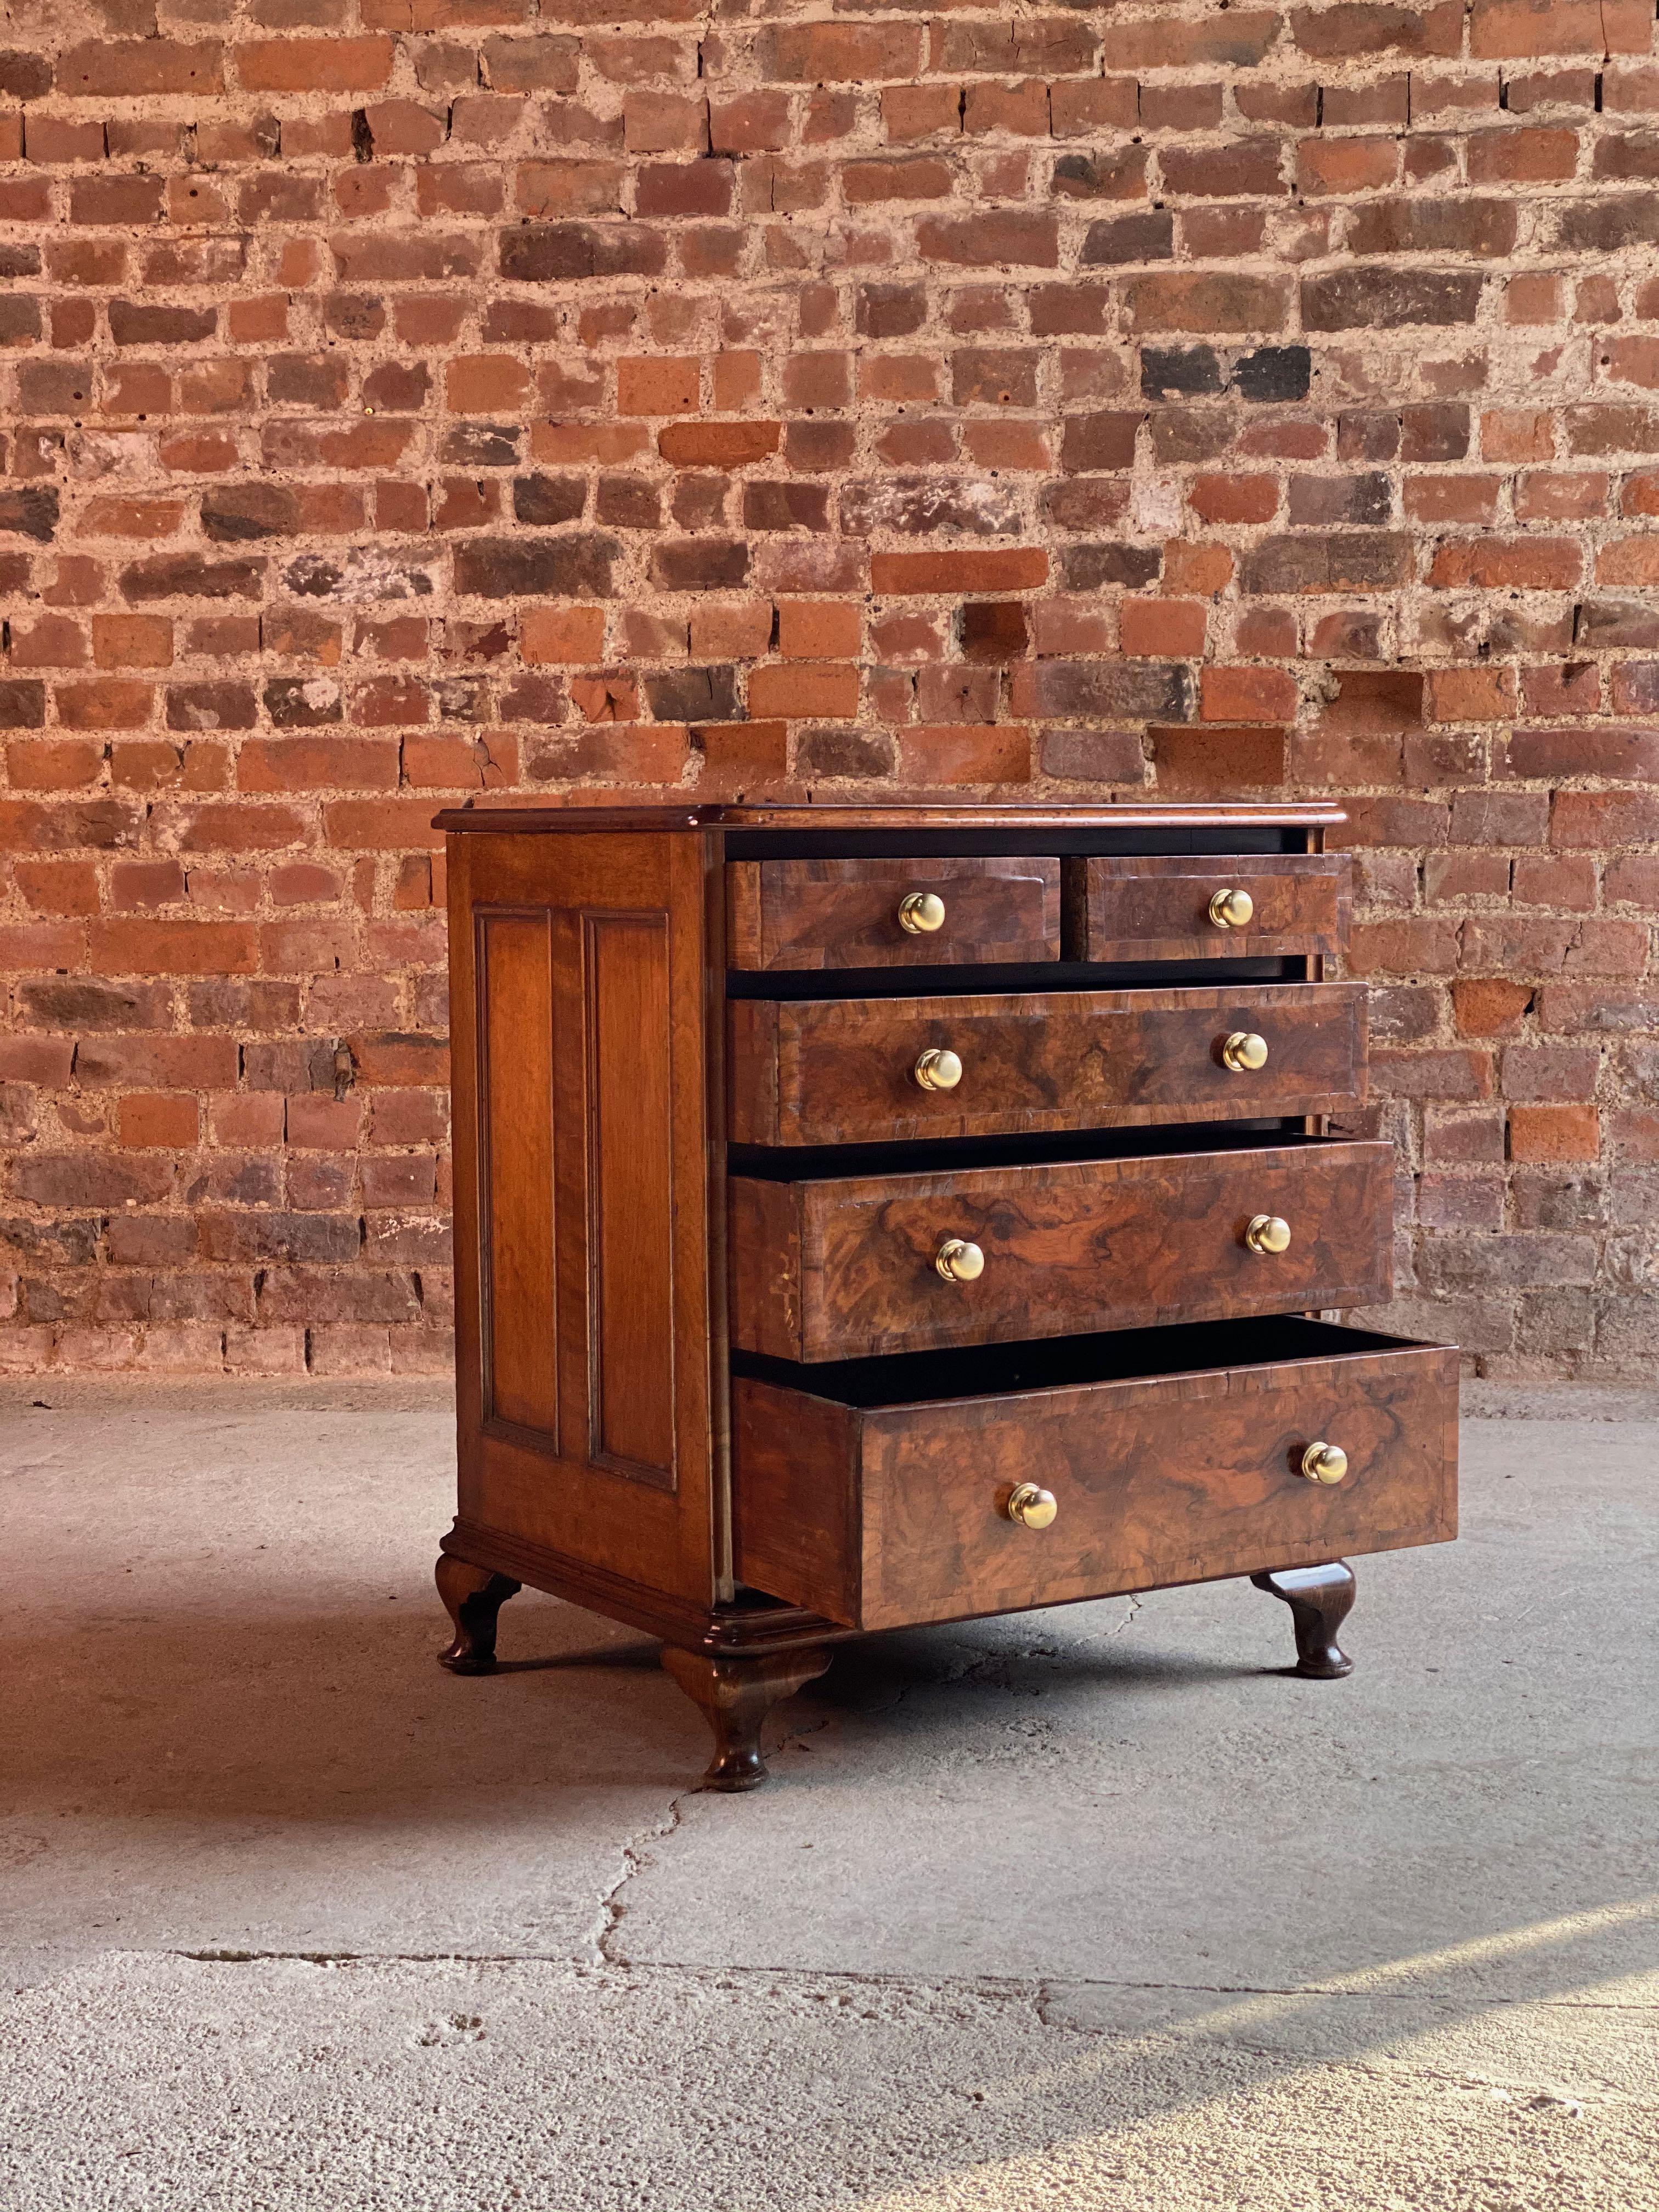 Antique 19th century burr walnut bachelors chest of drawers Georgian circa 1820

We are delighted to offer a Georgian 19th Century bachelors chest of drawers circa 1820, magnificent bachelors chest of drawers of small and petit proportions, made